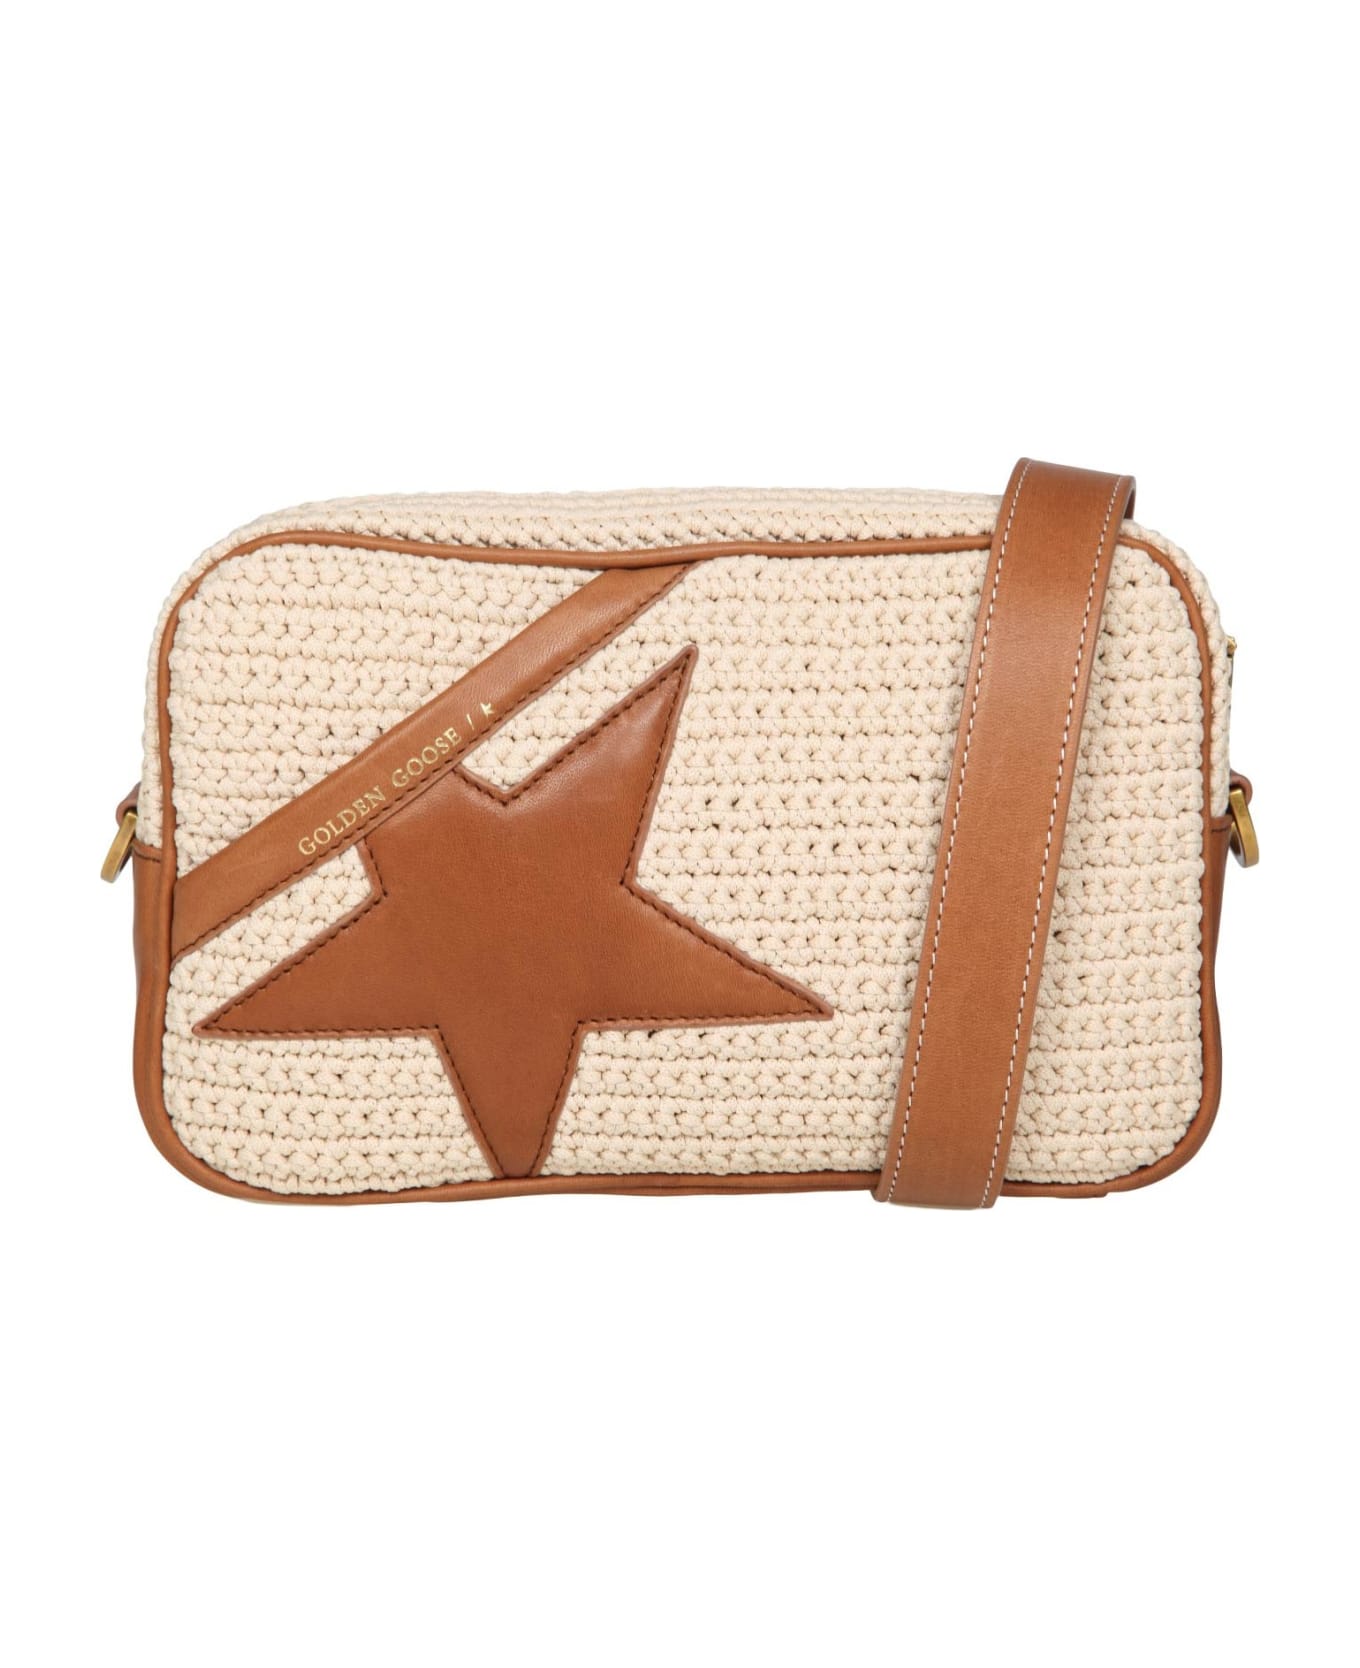 Golden Goose Star Bag In Crochet Fabric And Leather ショルダーバッグ